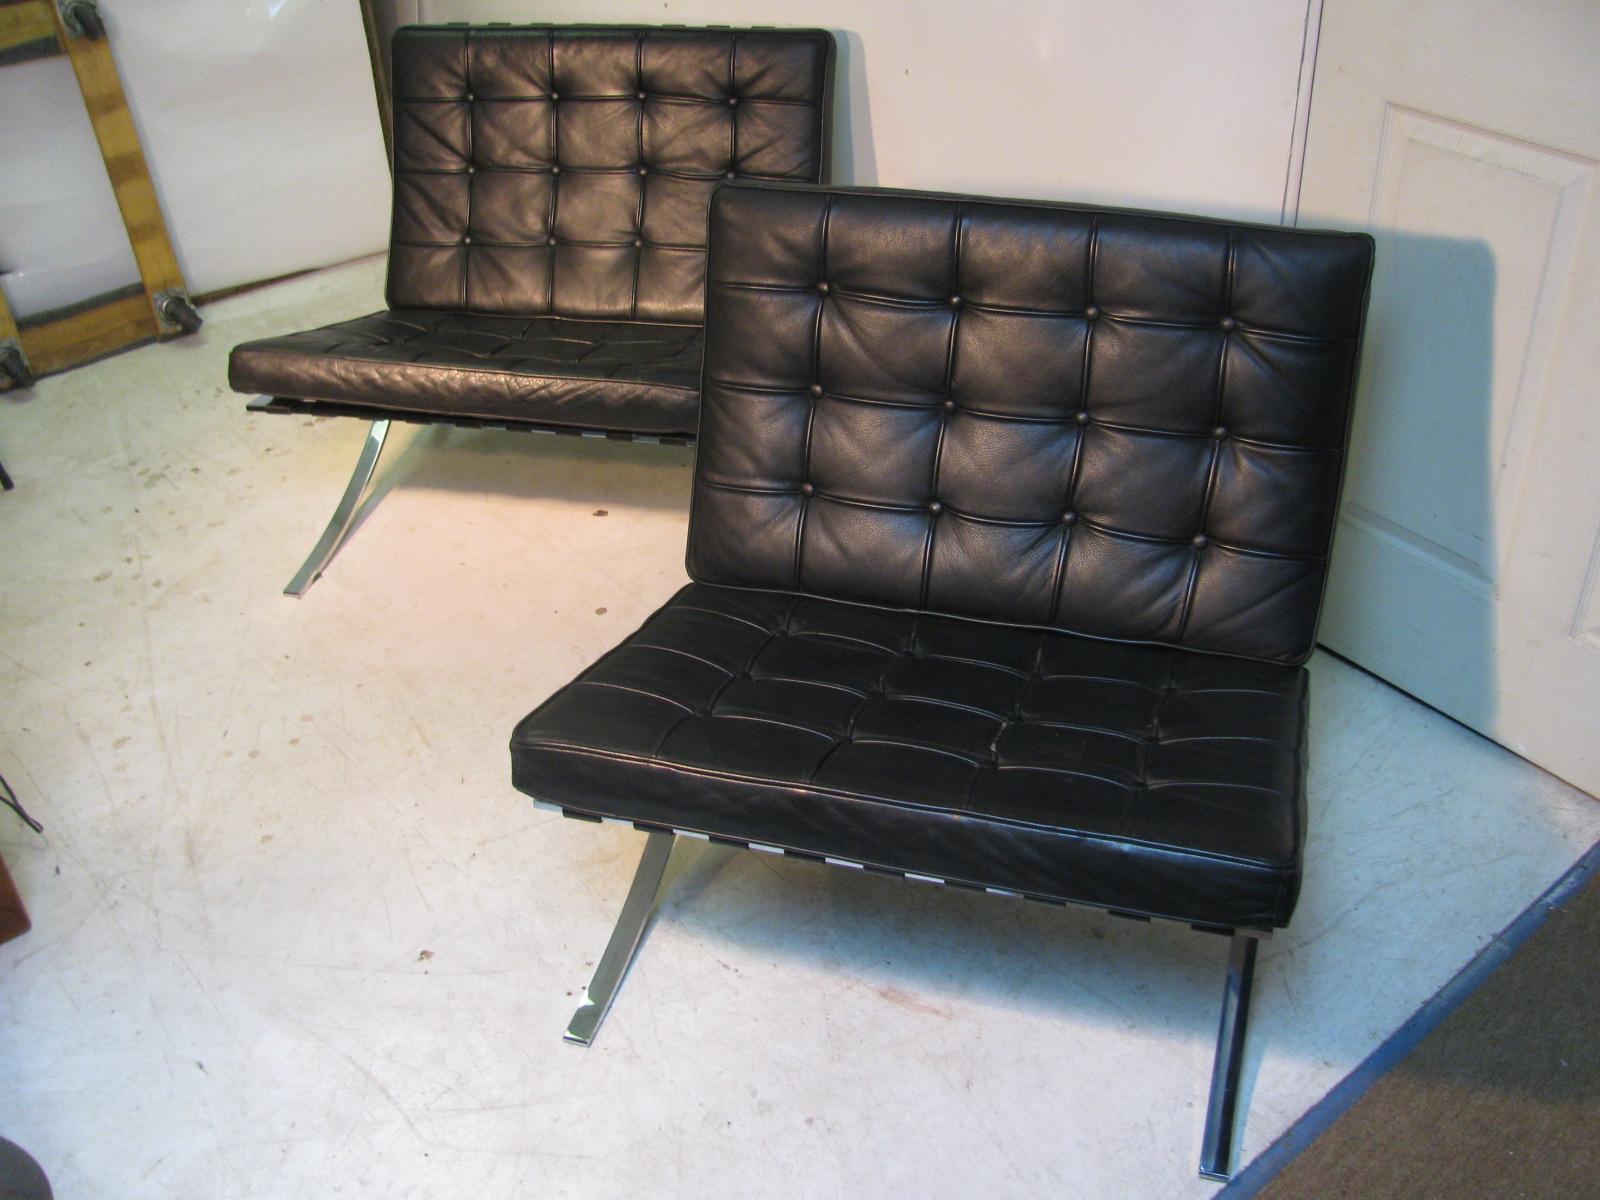 Polished Pair of Mid-Century Modern Ludwig Mies van der Rohe Barcelona Chairs by Knoll